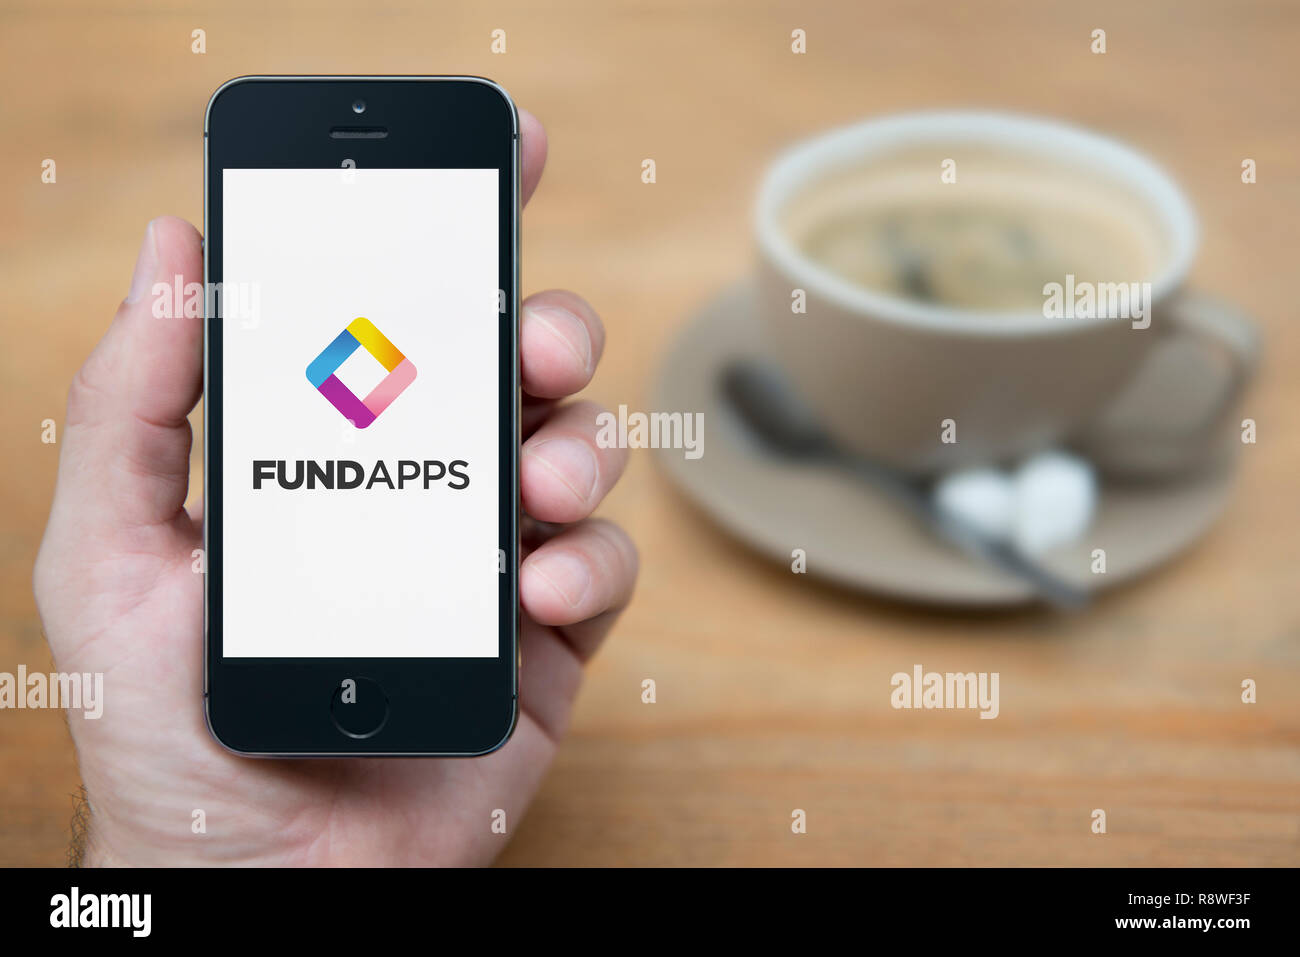 A man looks at his iPhone which displays the Fund Apps logo (Editorial use only). Stock Photo